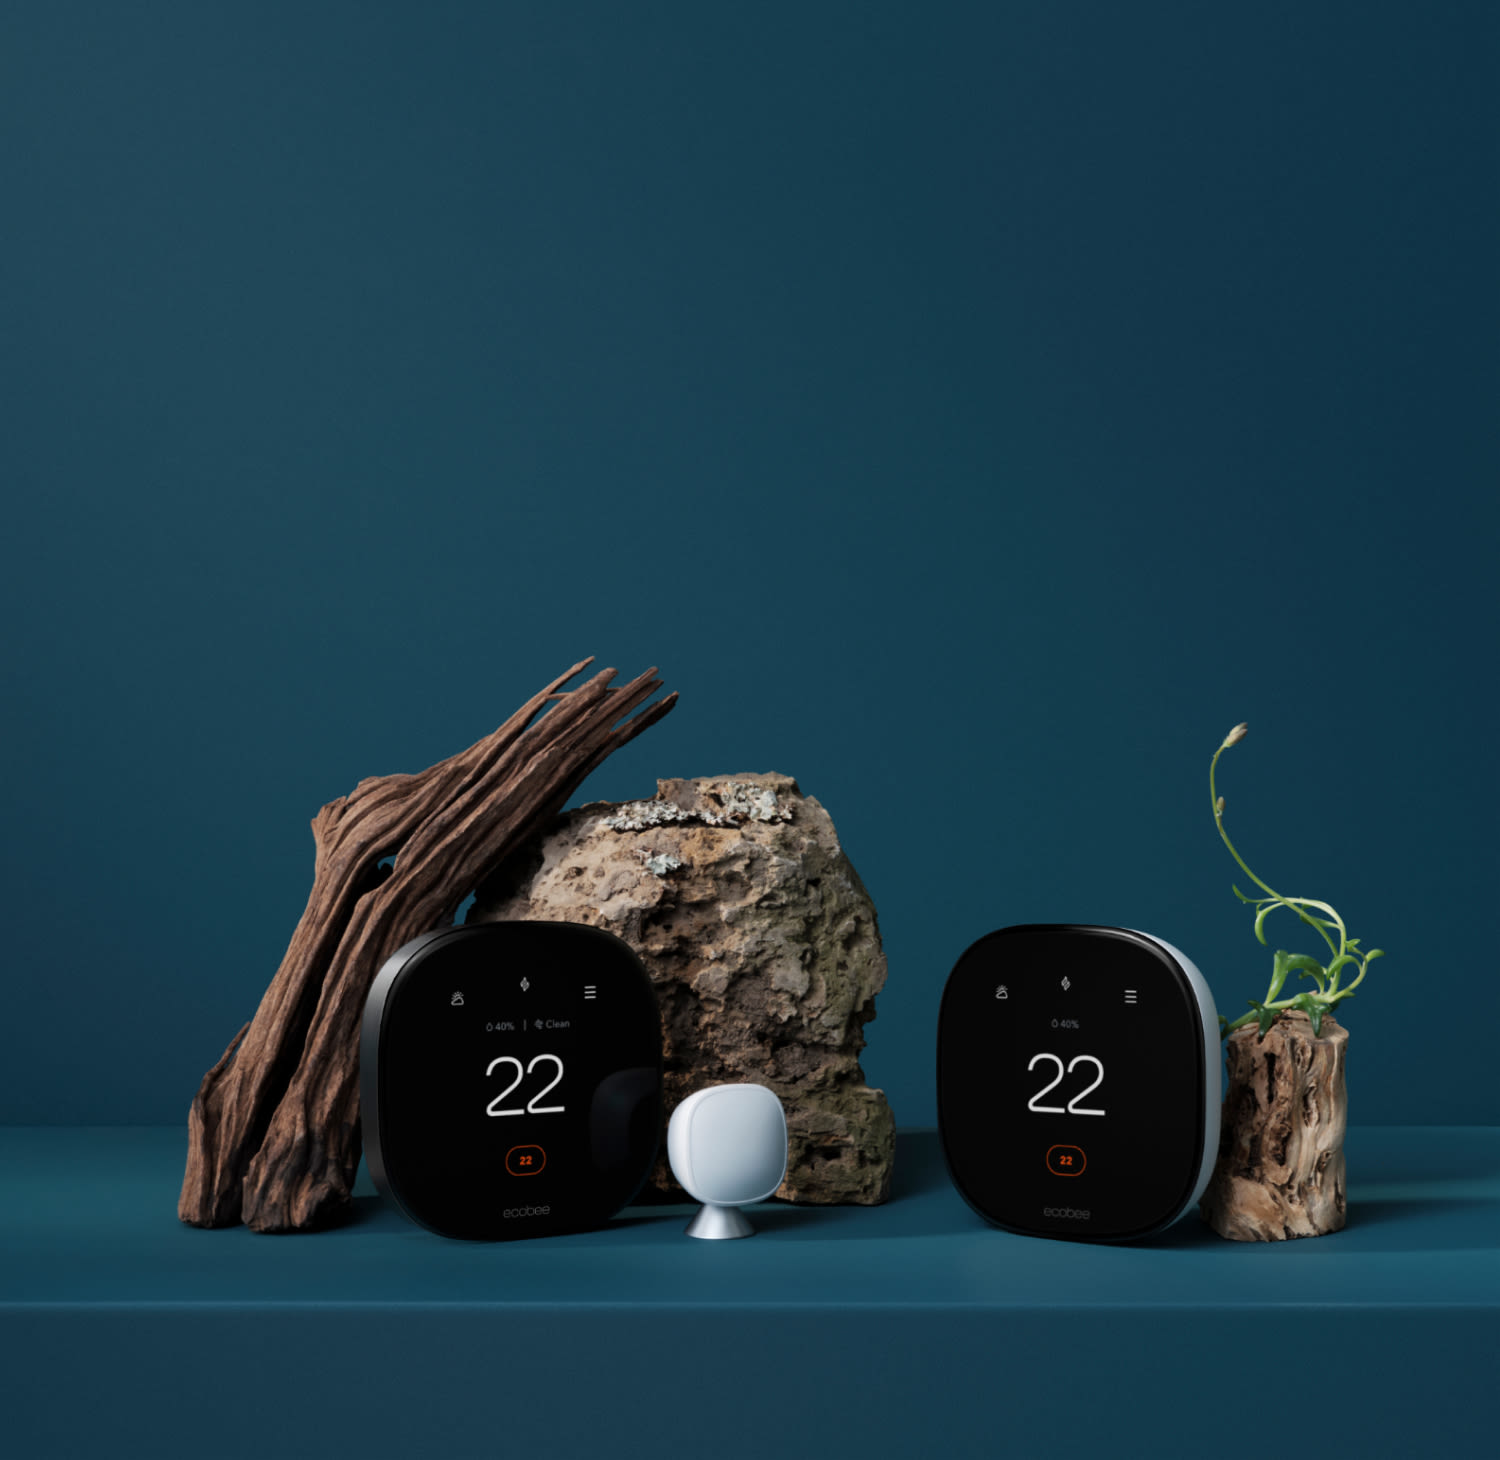 ecobee Smart Thermostat Premium with included SmartSensor and Smart Thermostat Enhanced in still-life scene amidst an arrangement of dried bark, coarse stone and delicate wildflowers on navy blue backdrop.